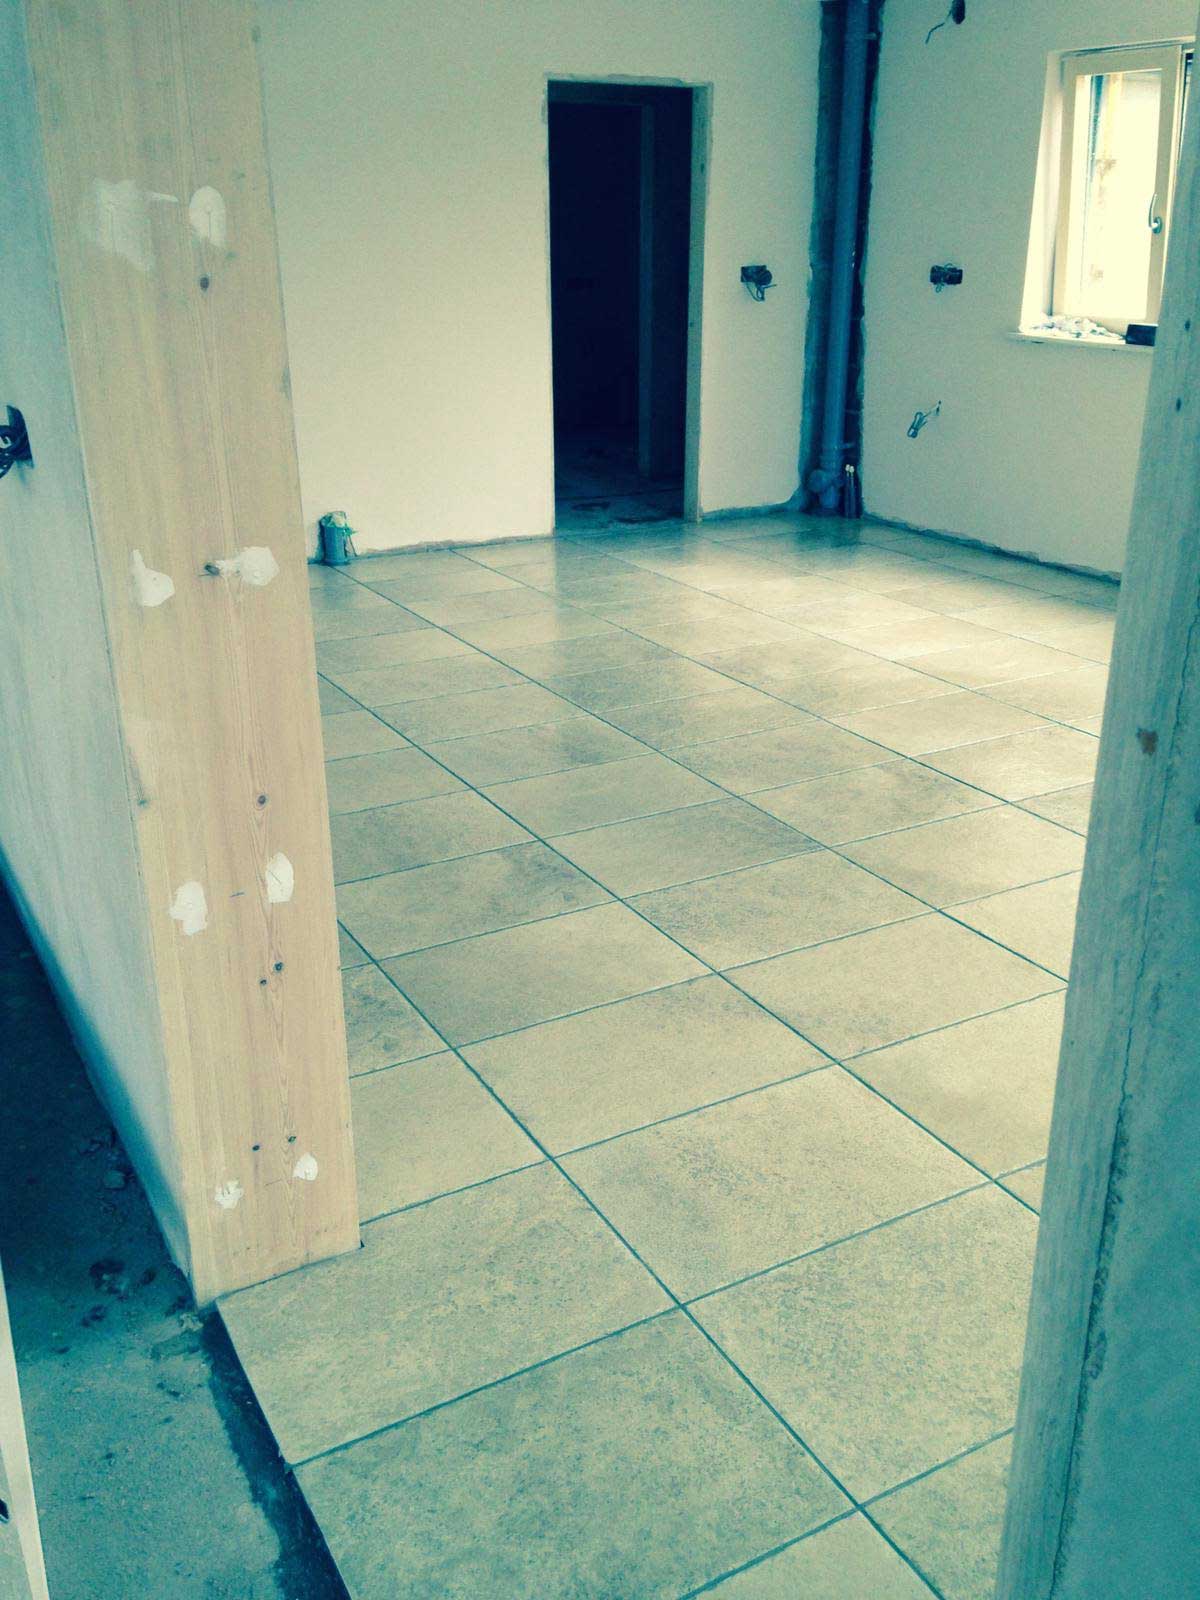 Tiled square flooring completed.